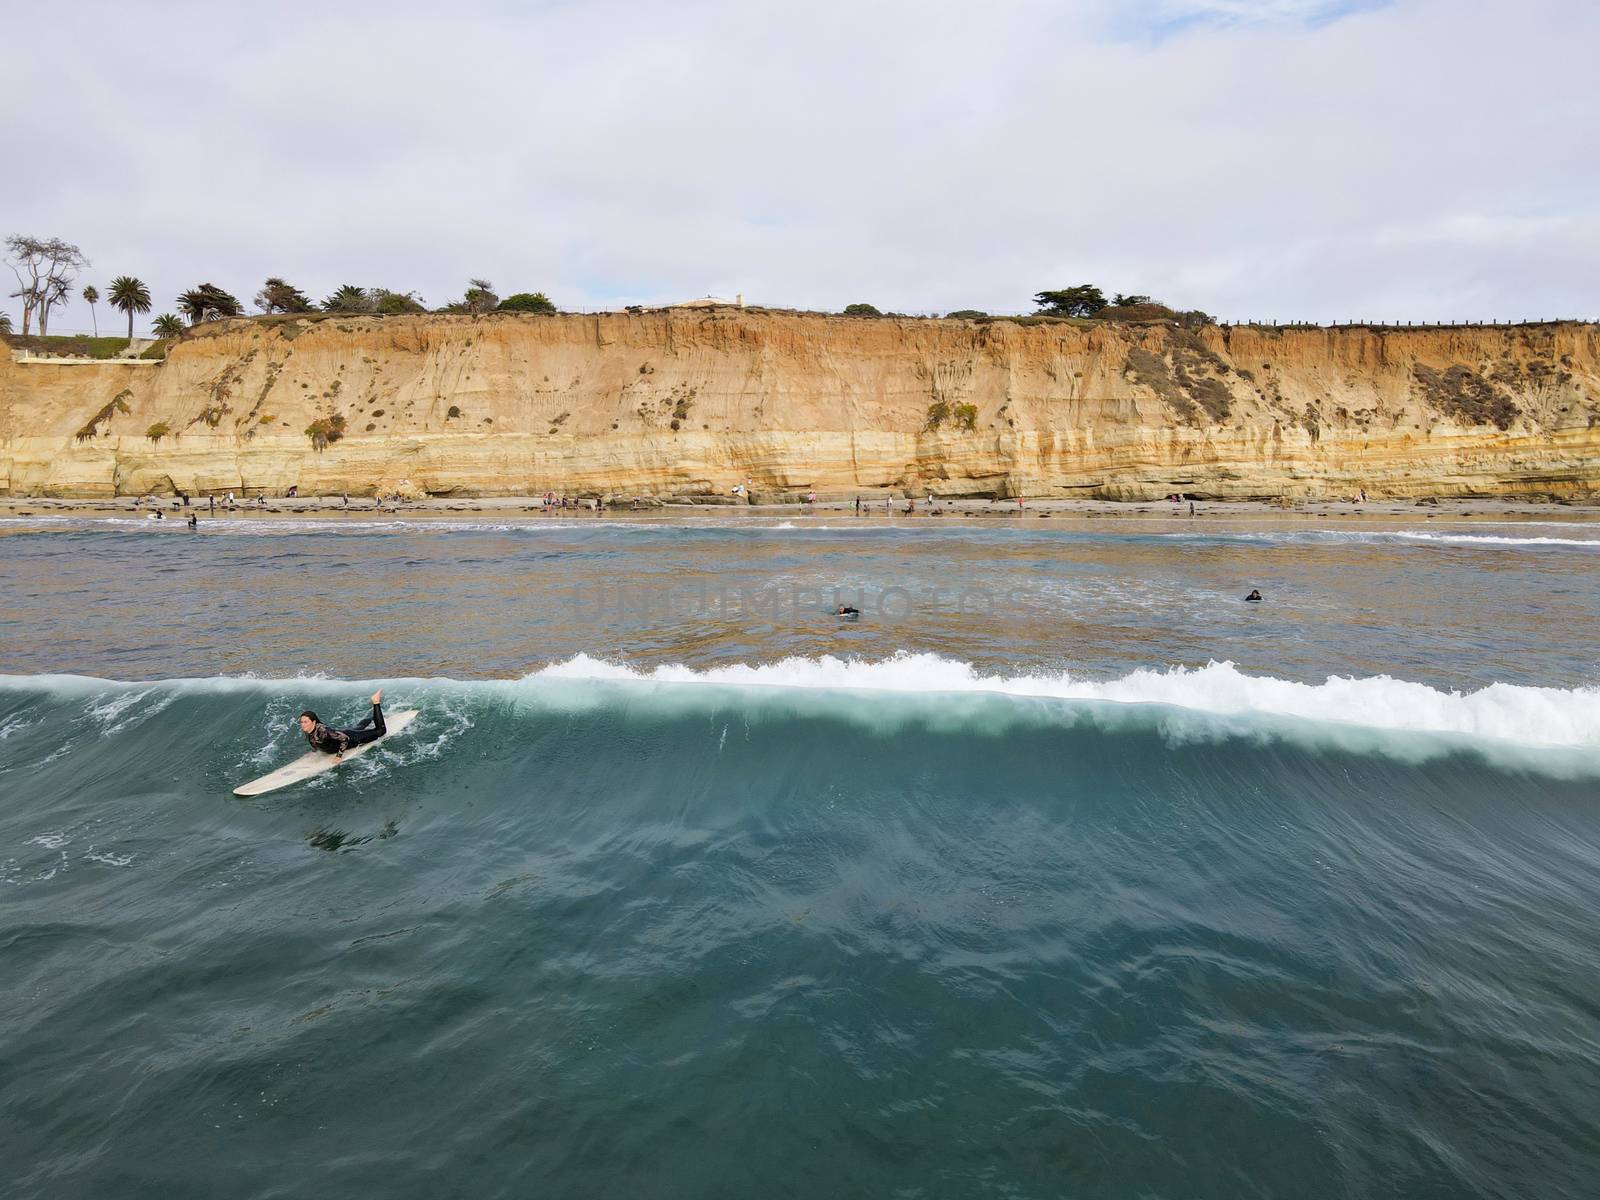 Surfers with wet suit paddling and enjoying the big waves. San Diego, California, USA. November 20th, 2020